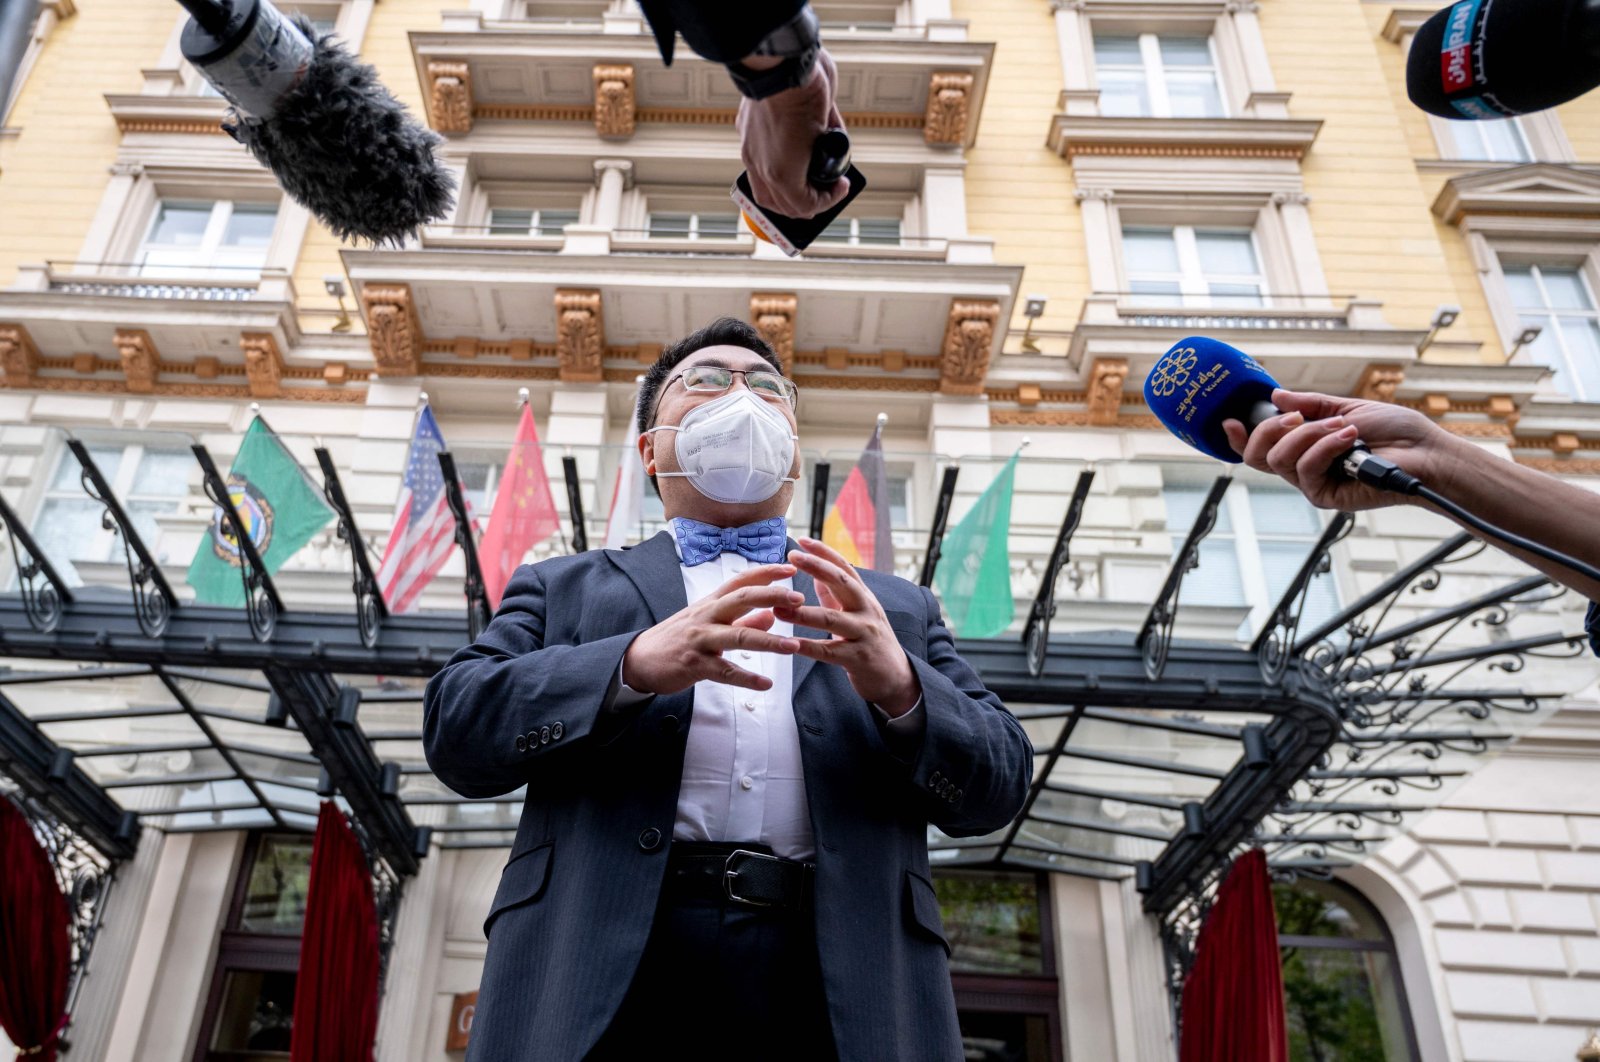 The ambassador of the Permanent Mission of the People's Republic of China to the United Nations, Wang Qun, speaks to journalists outside the Grand Hotel Wien after talks with Iran in Vienna, Austria, April 27, 2021. (AFP Photo)